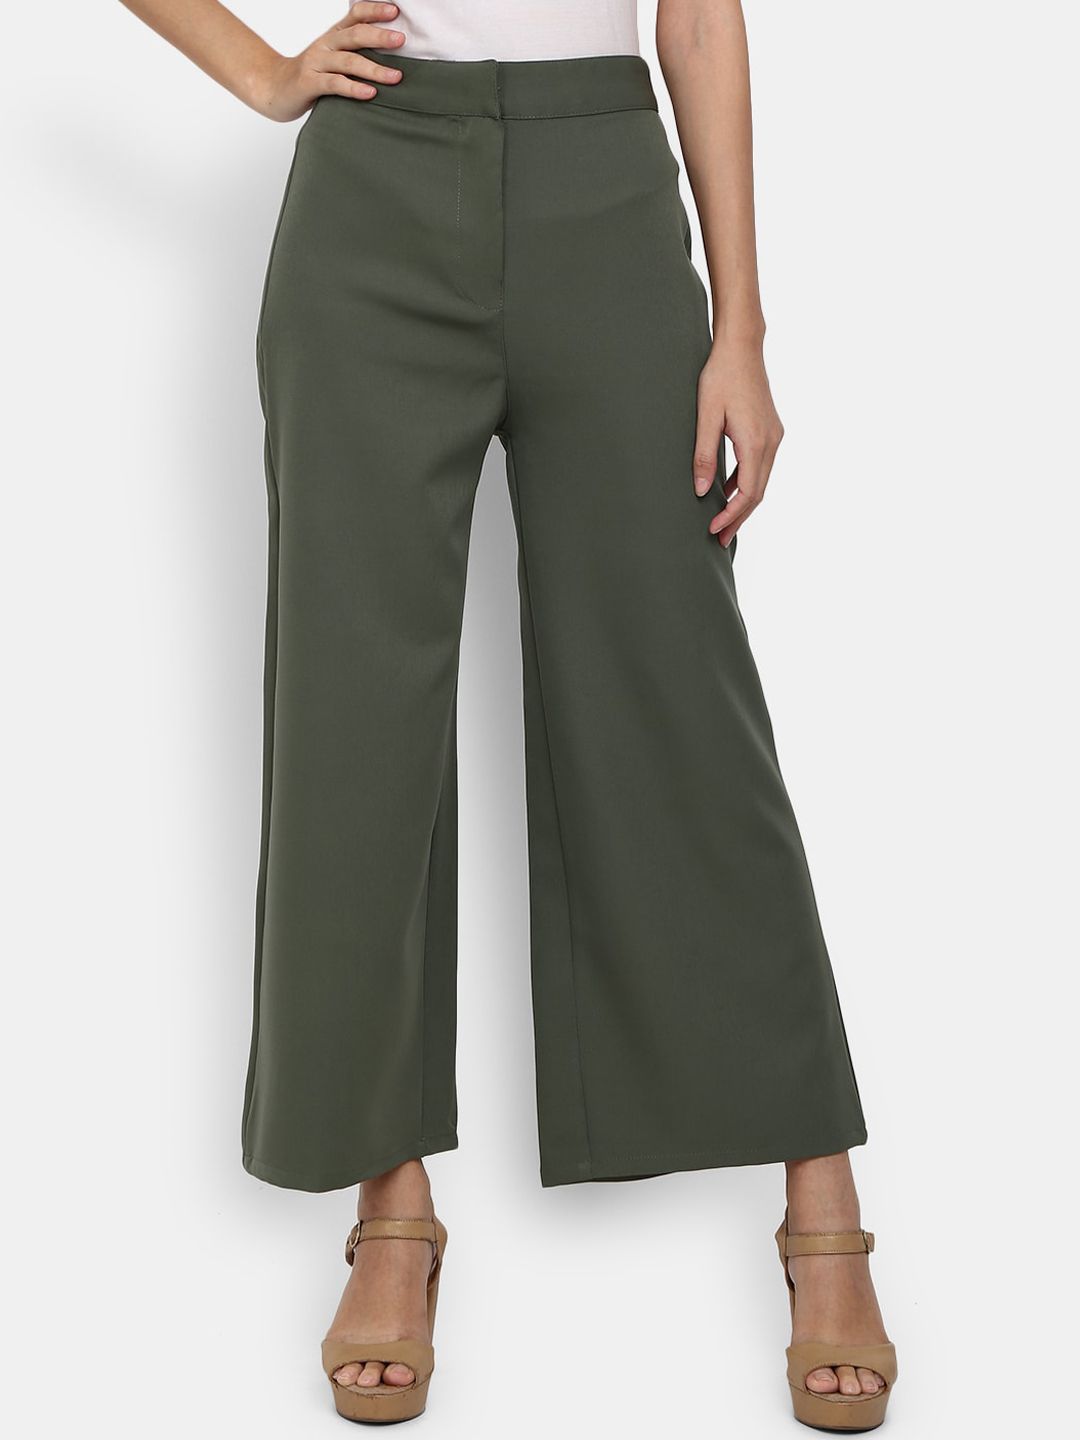 V-Mart Women Olive Green Classic Trouser Price in India